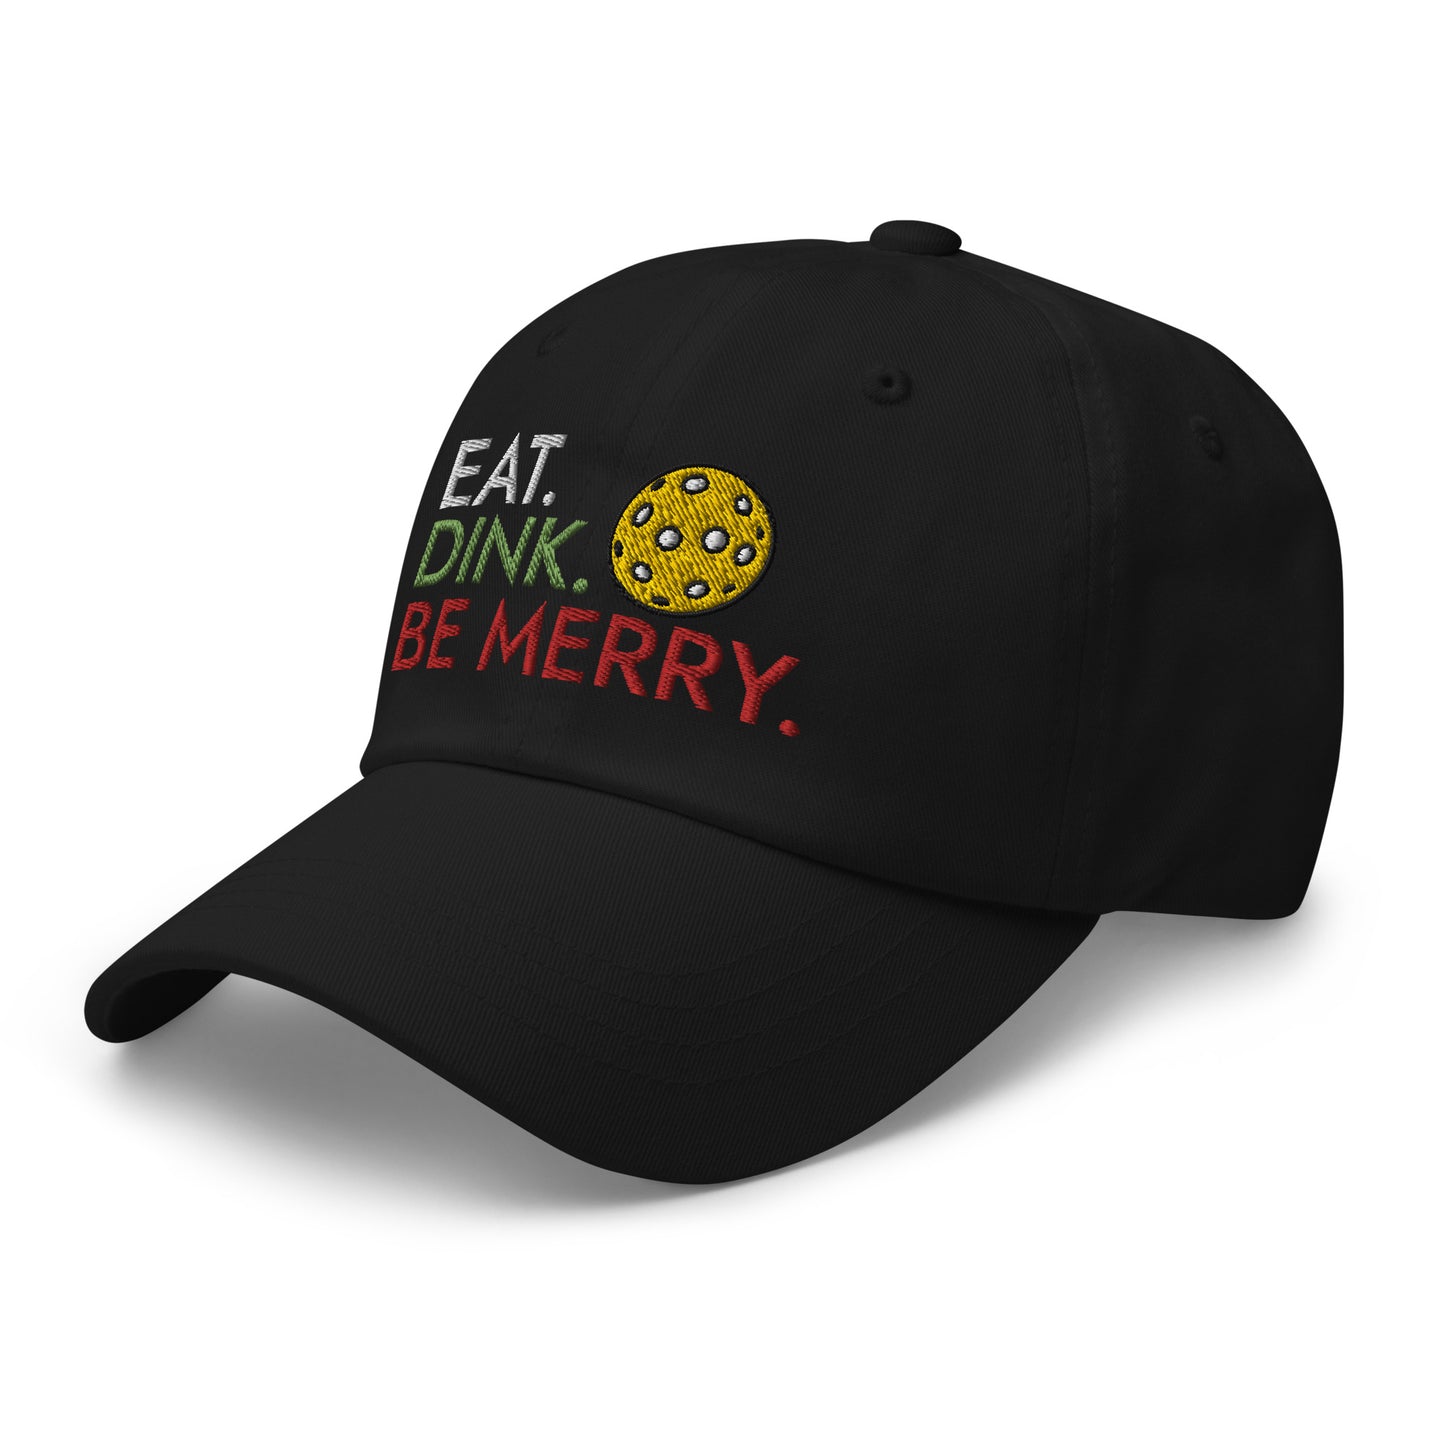 Cotton Twill Classic Cap: Embroidered Eat Dink Be Merry Pickleball (black)